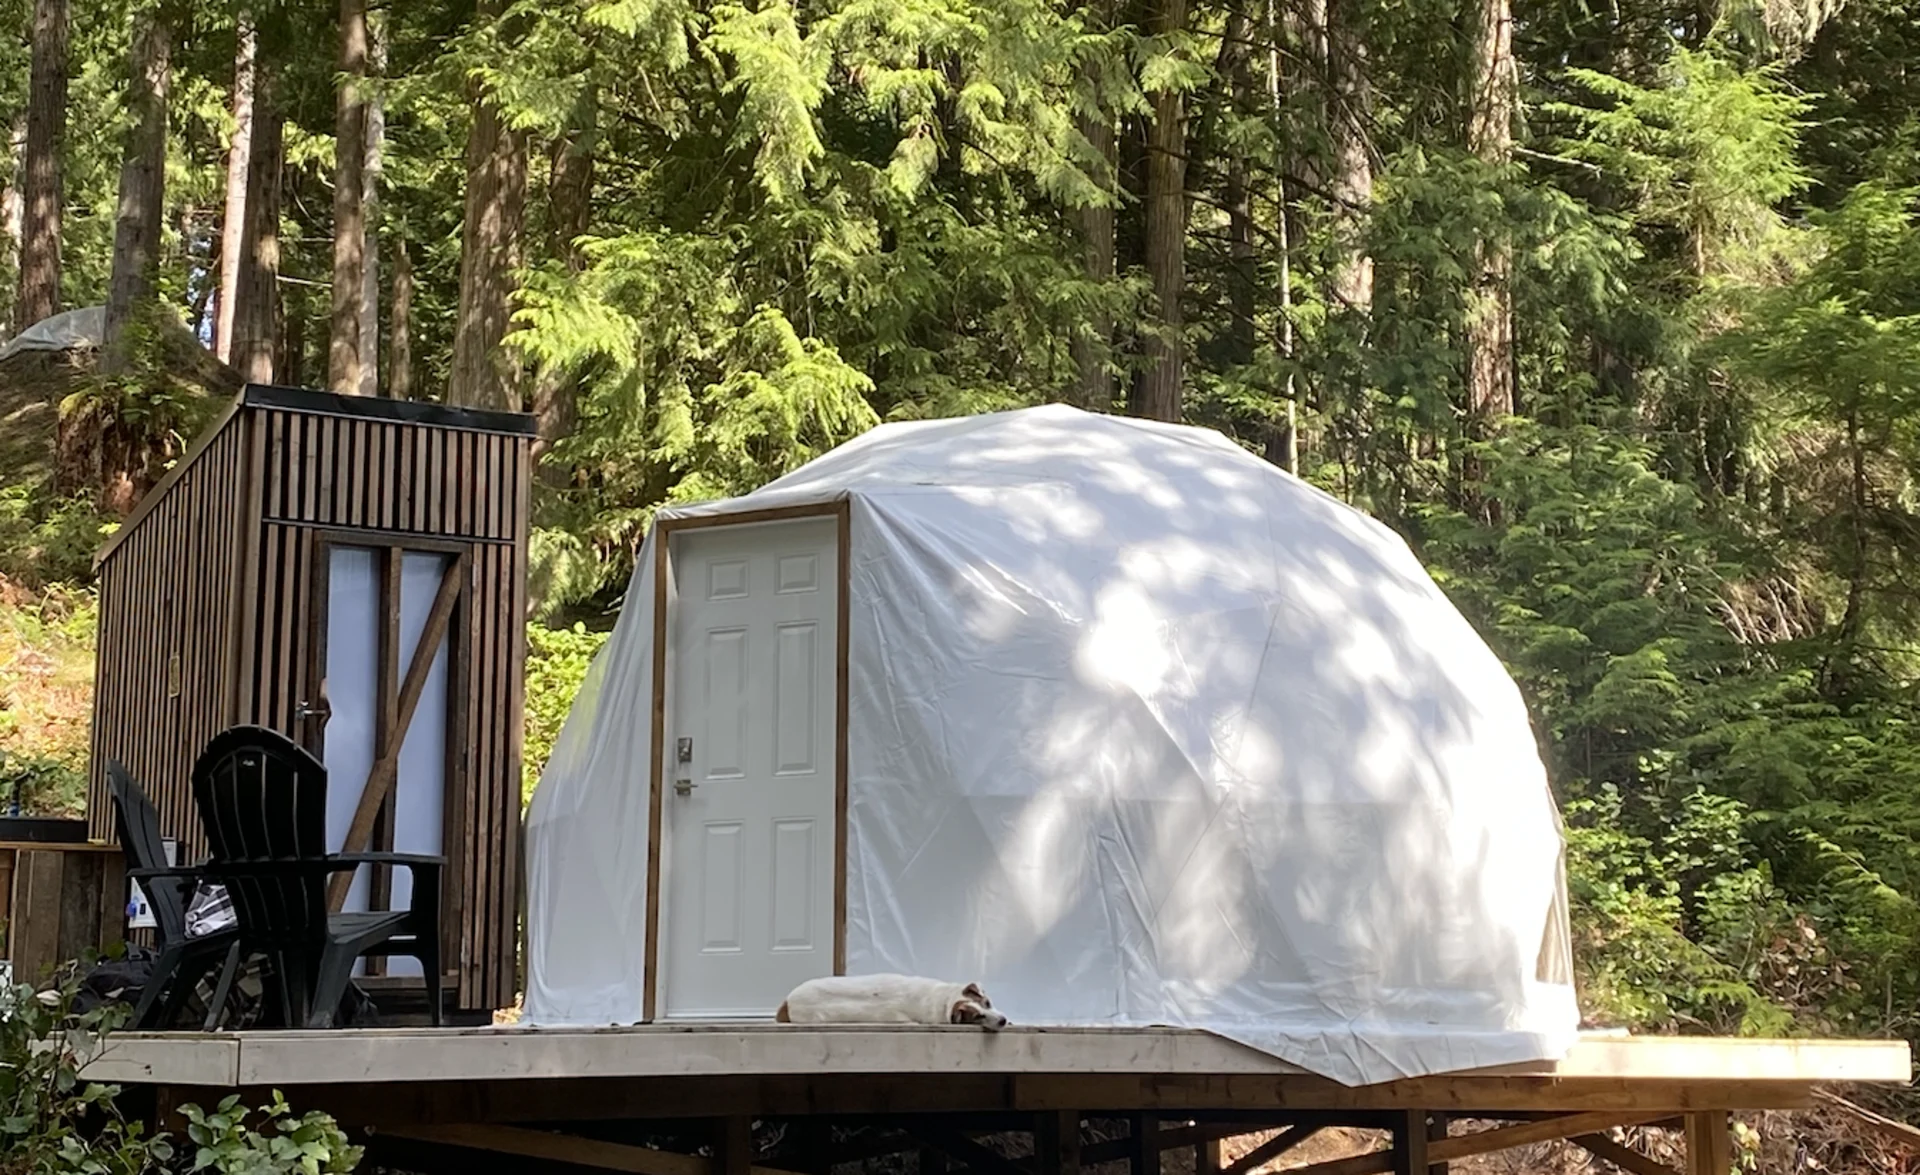 Eco-glamping combines luxurious camping with environmental consciousness